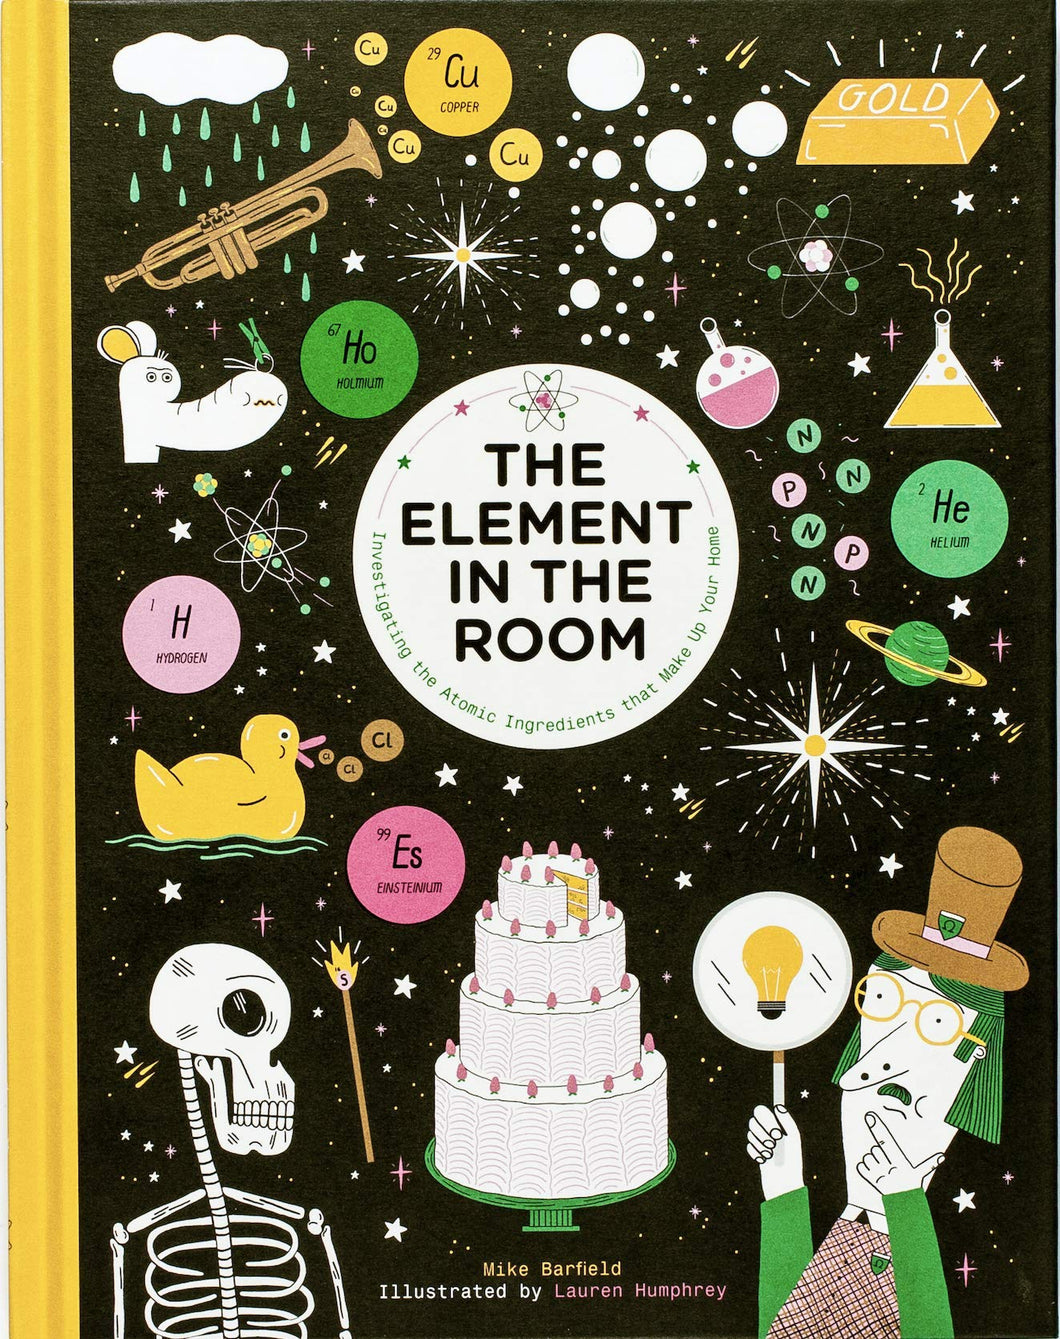 The Element in the Room Investigating the Atomic Ingredients that Make Up Your Home